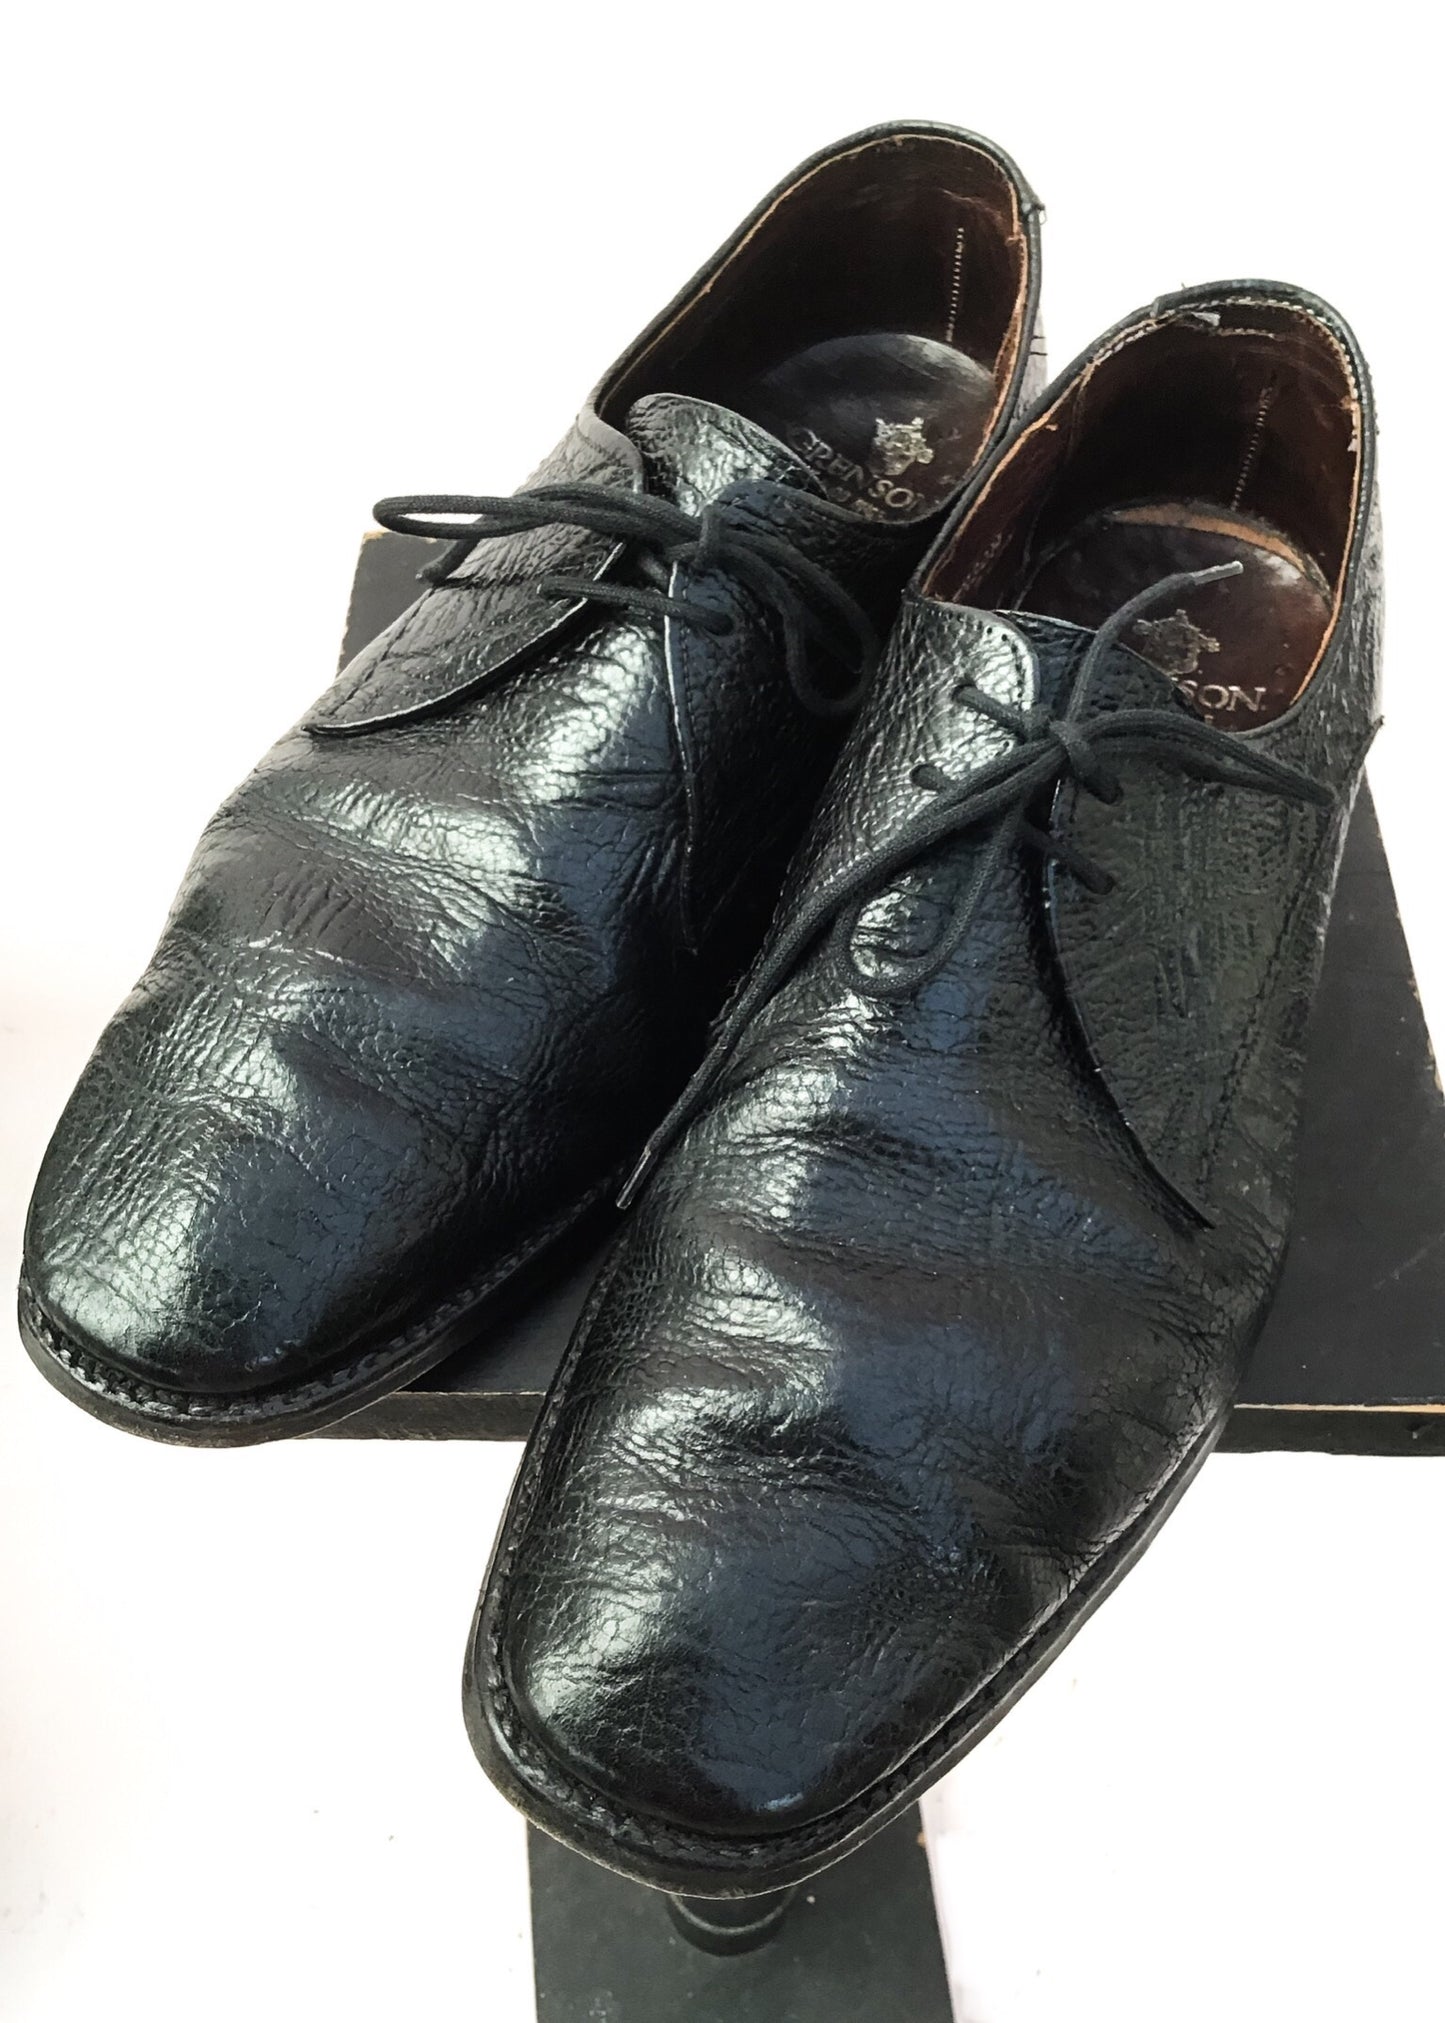 Men's Black Antelope Leather Lace Up Leather Shoes by Grenson • Size UK 8.5